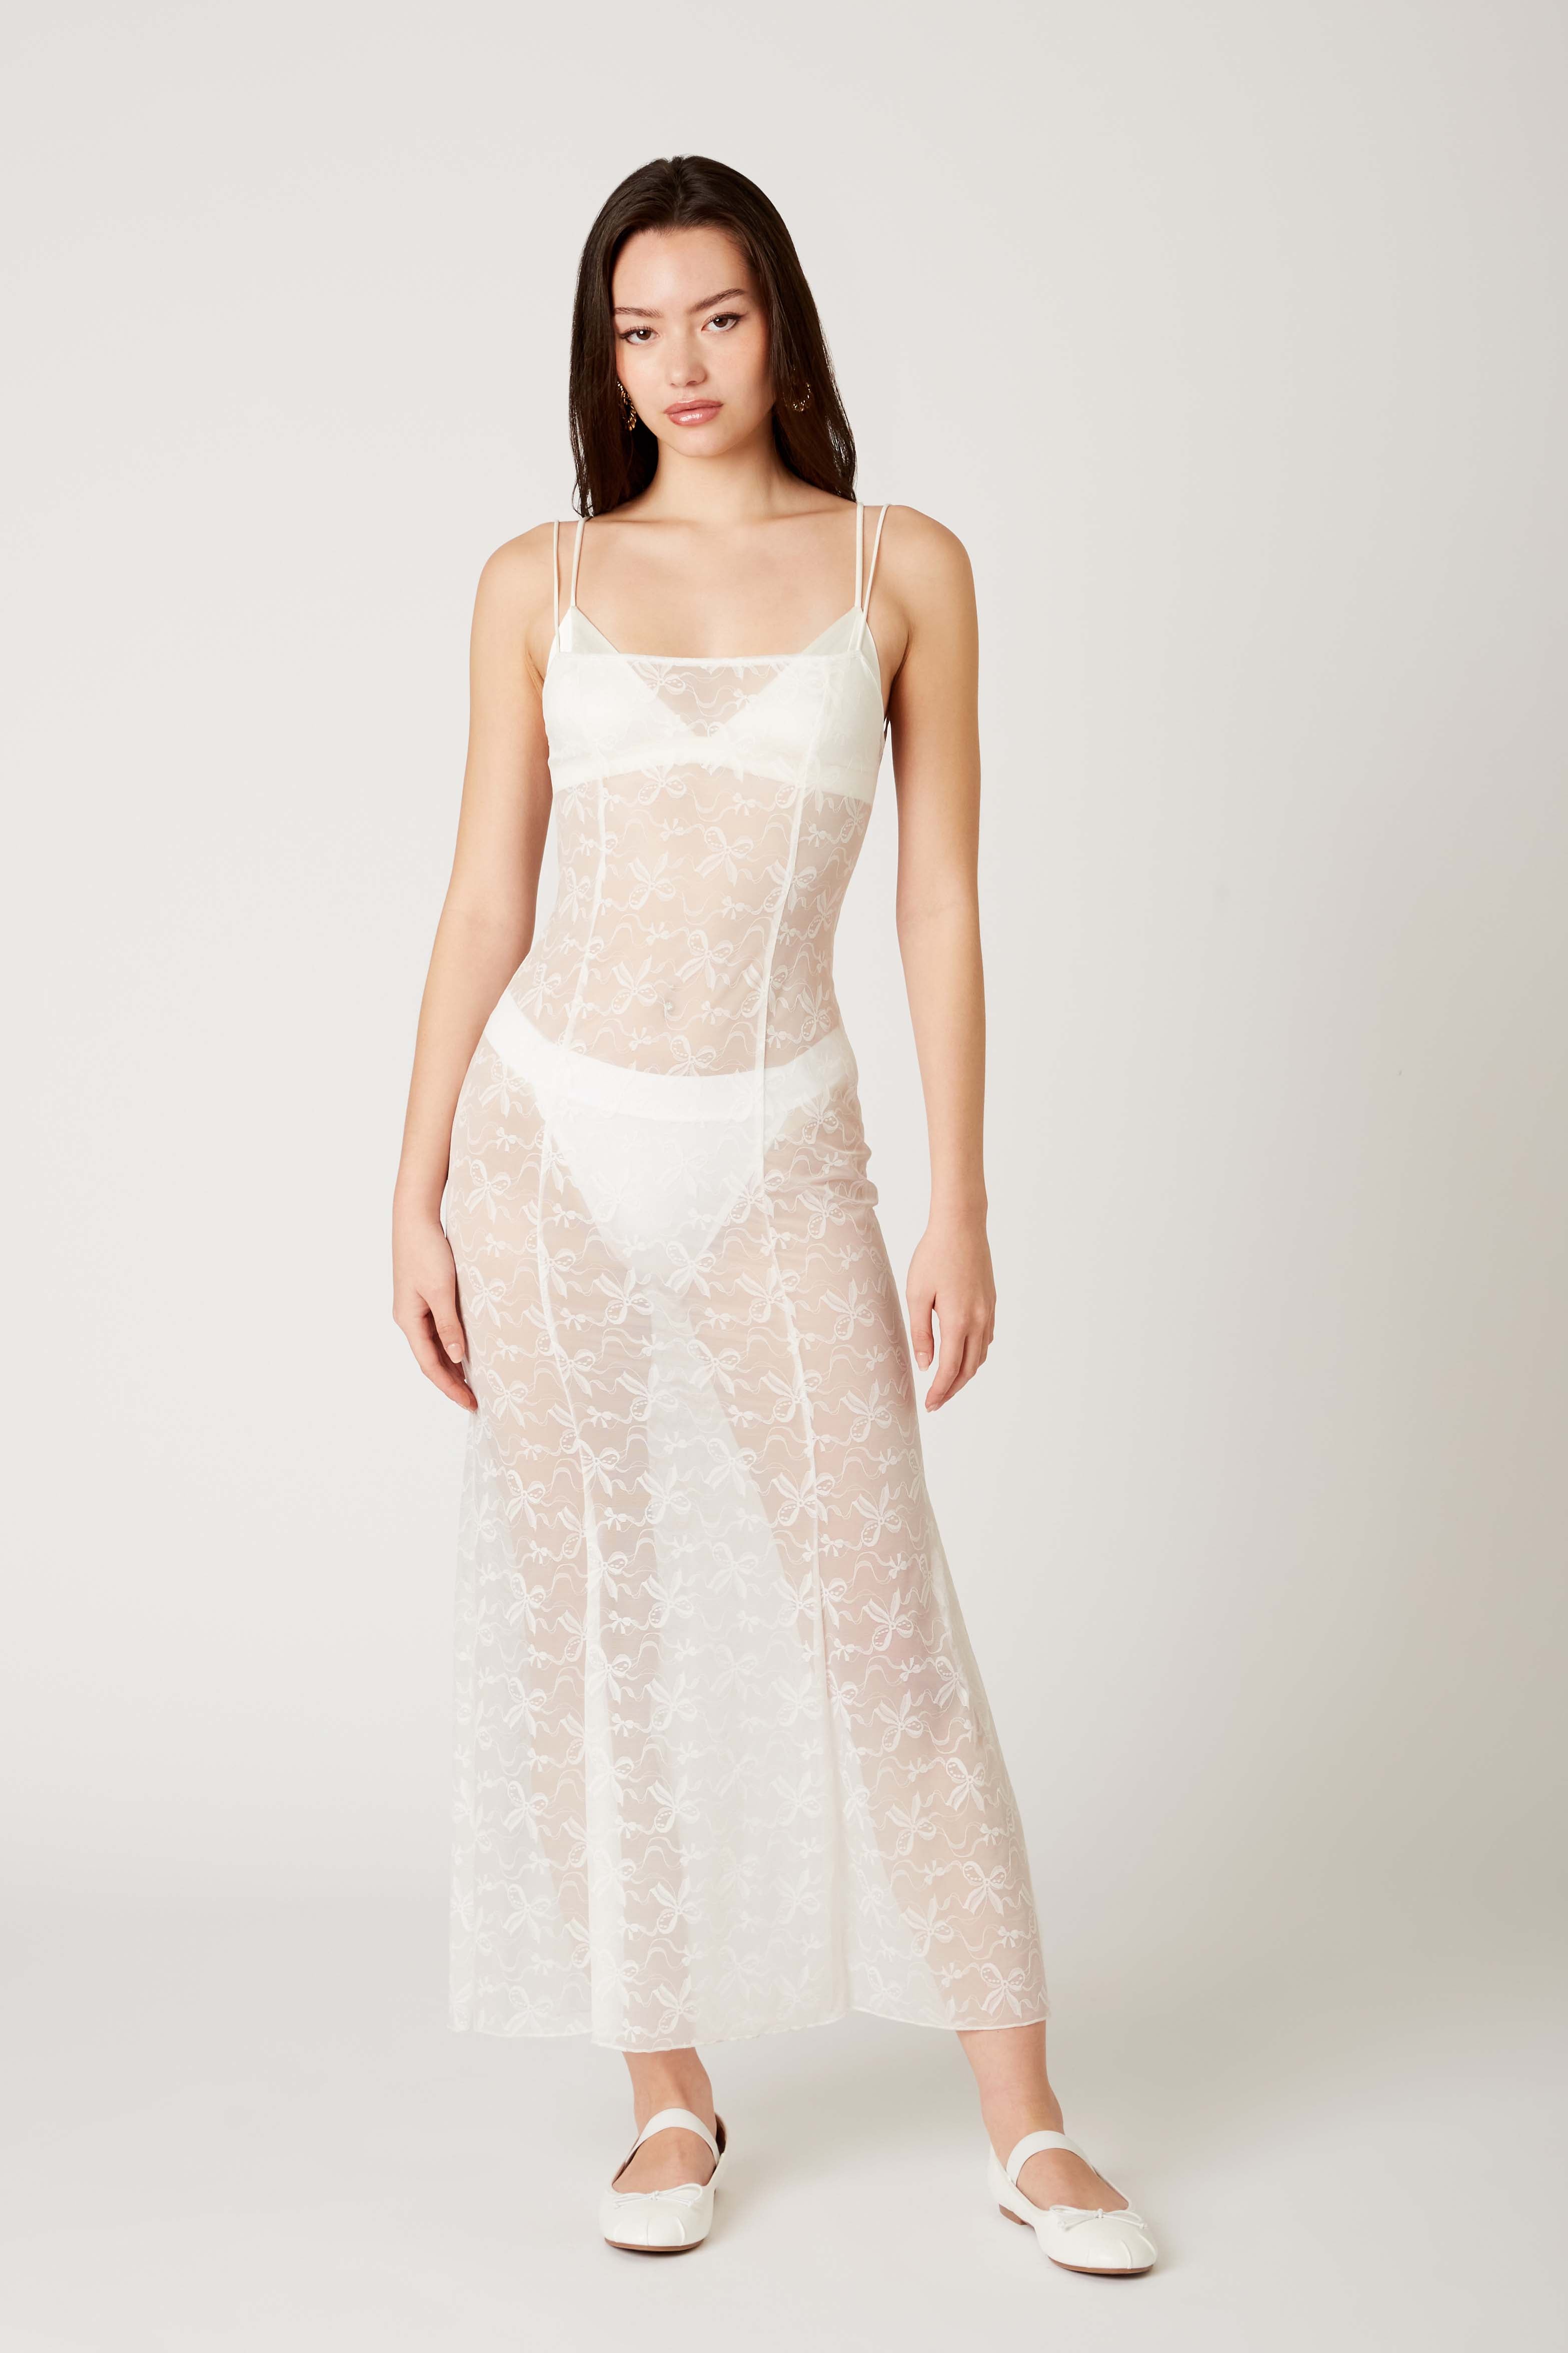 Lace Maxi Dress in white front view